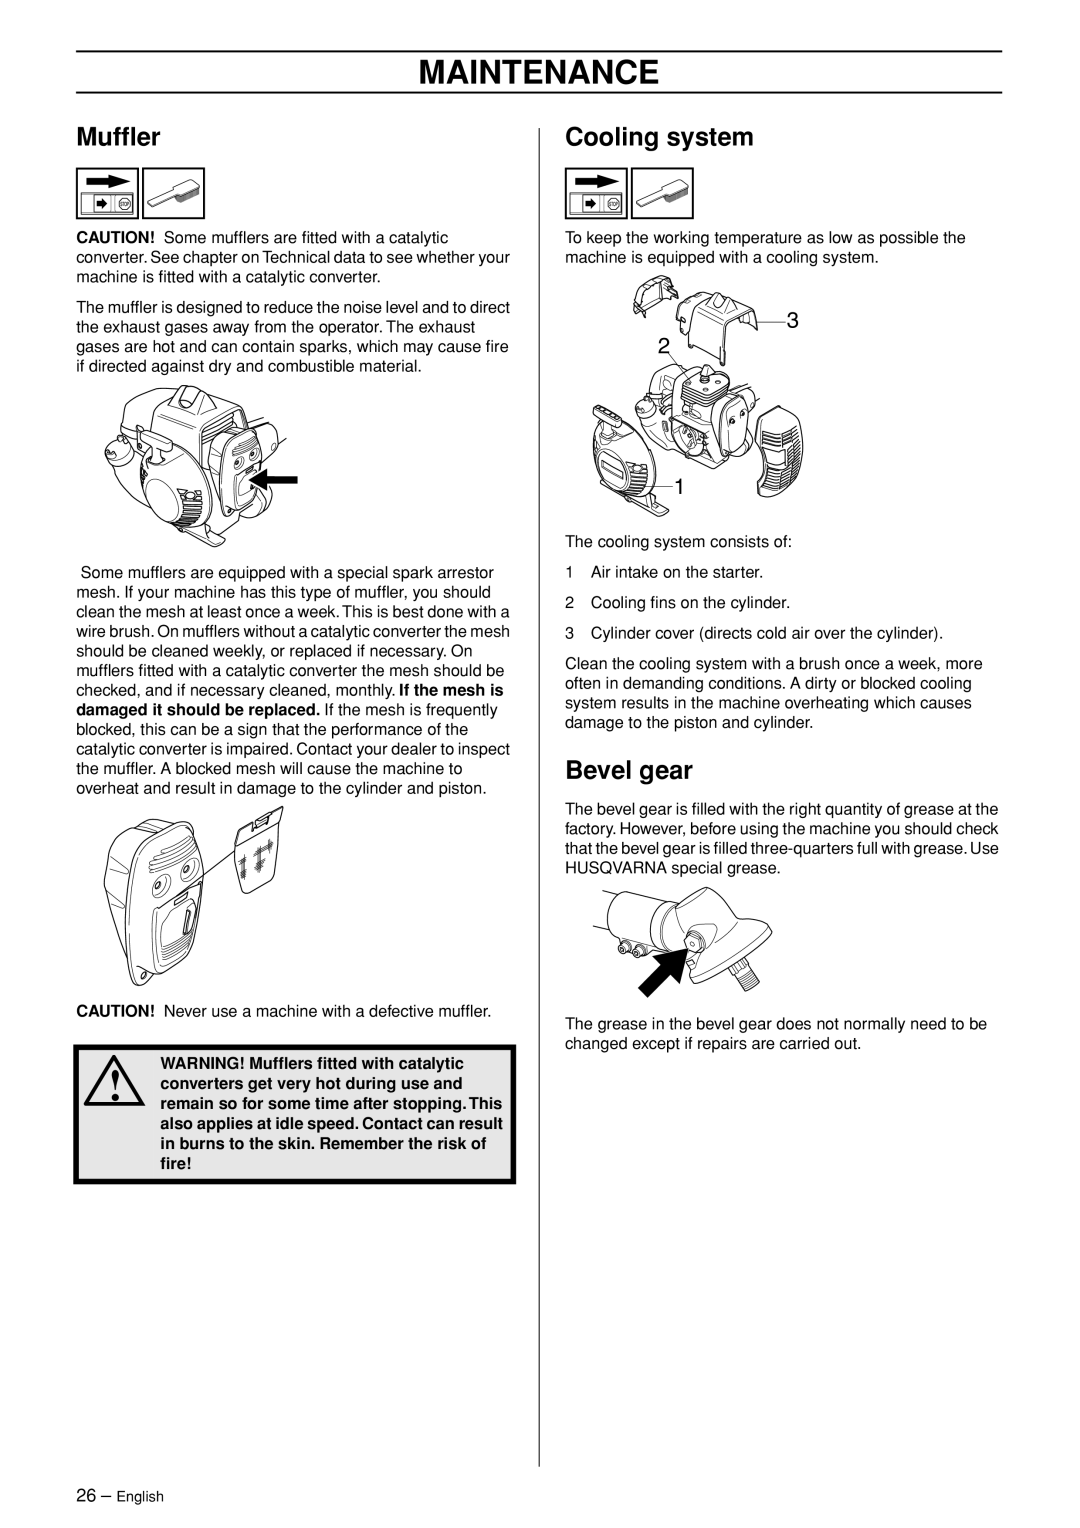 Husqvarna 333R-Series manual Cooling system, Bevel gear, Maintenance, WARNING! Mufﬂers ﬁtted with catalytic 